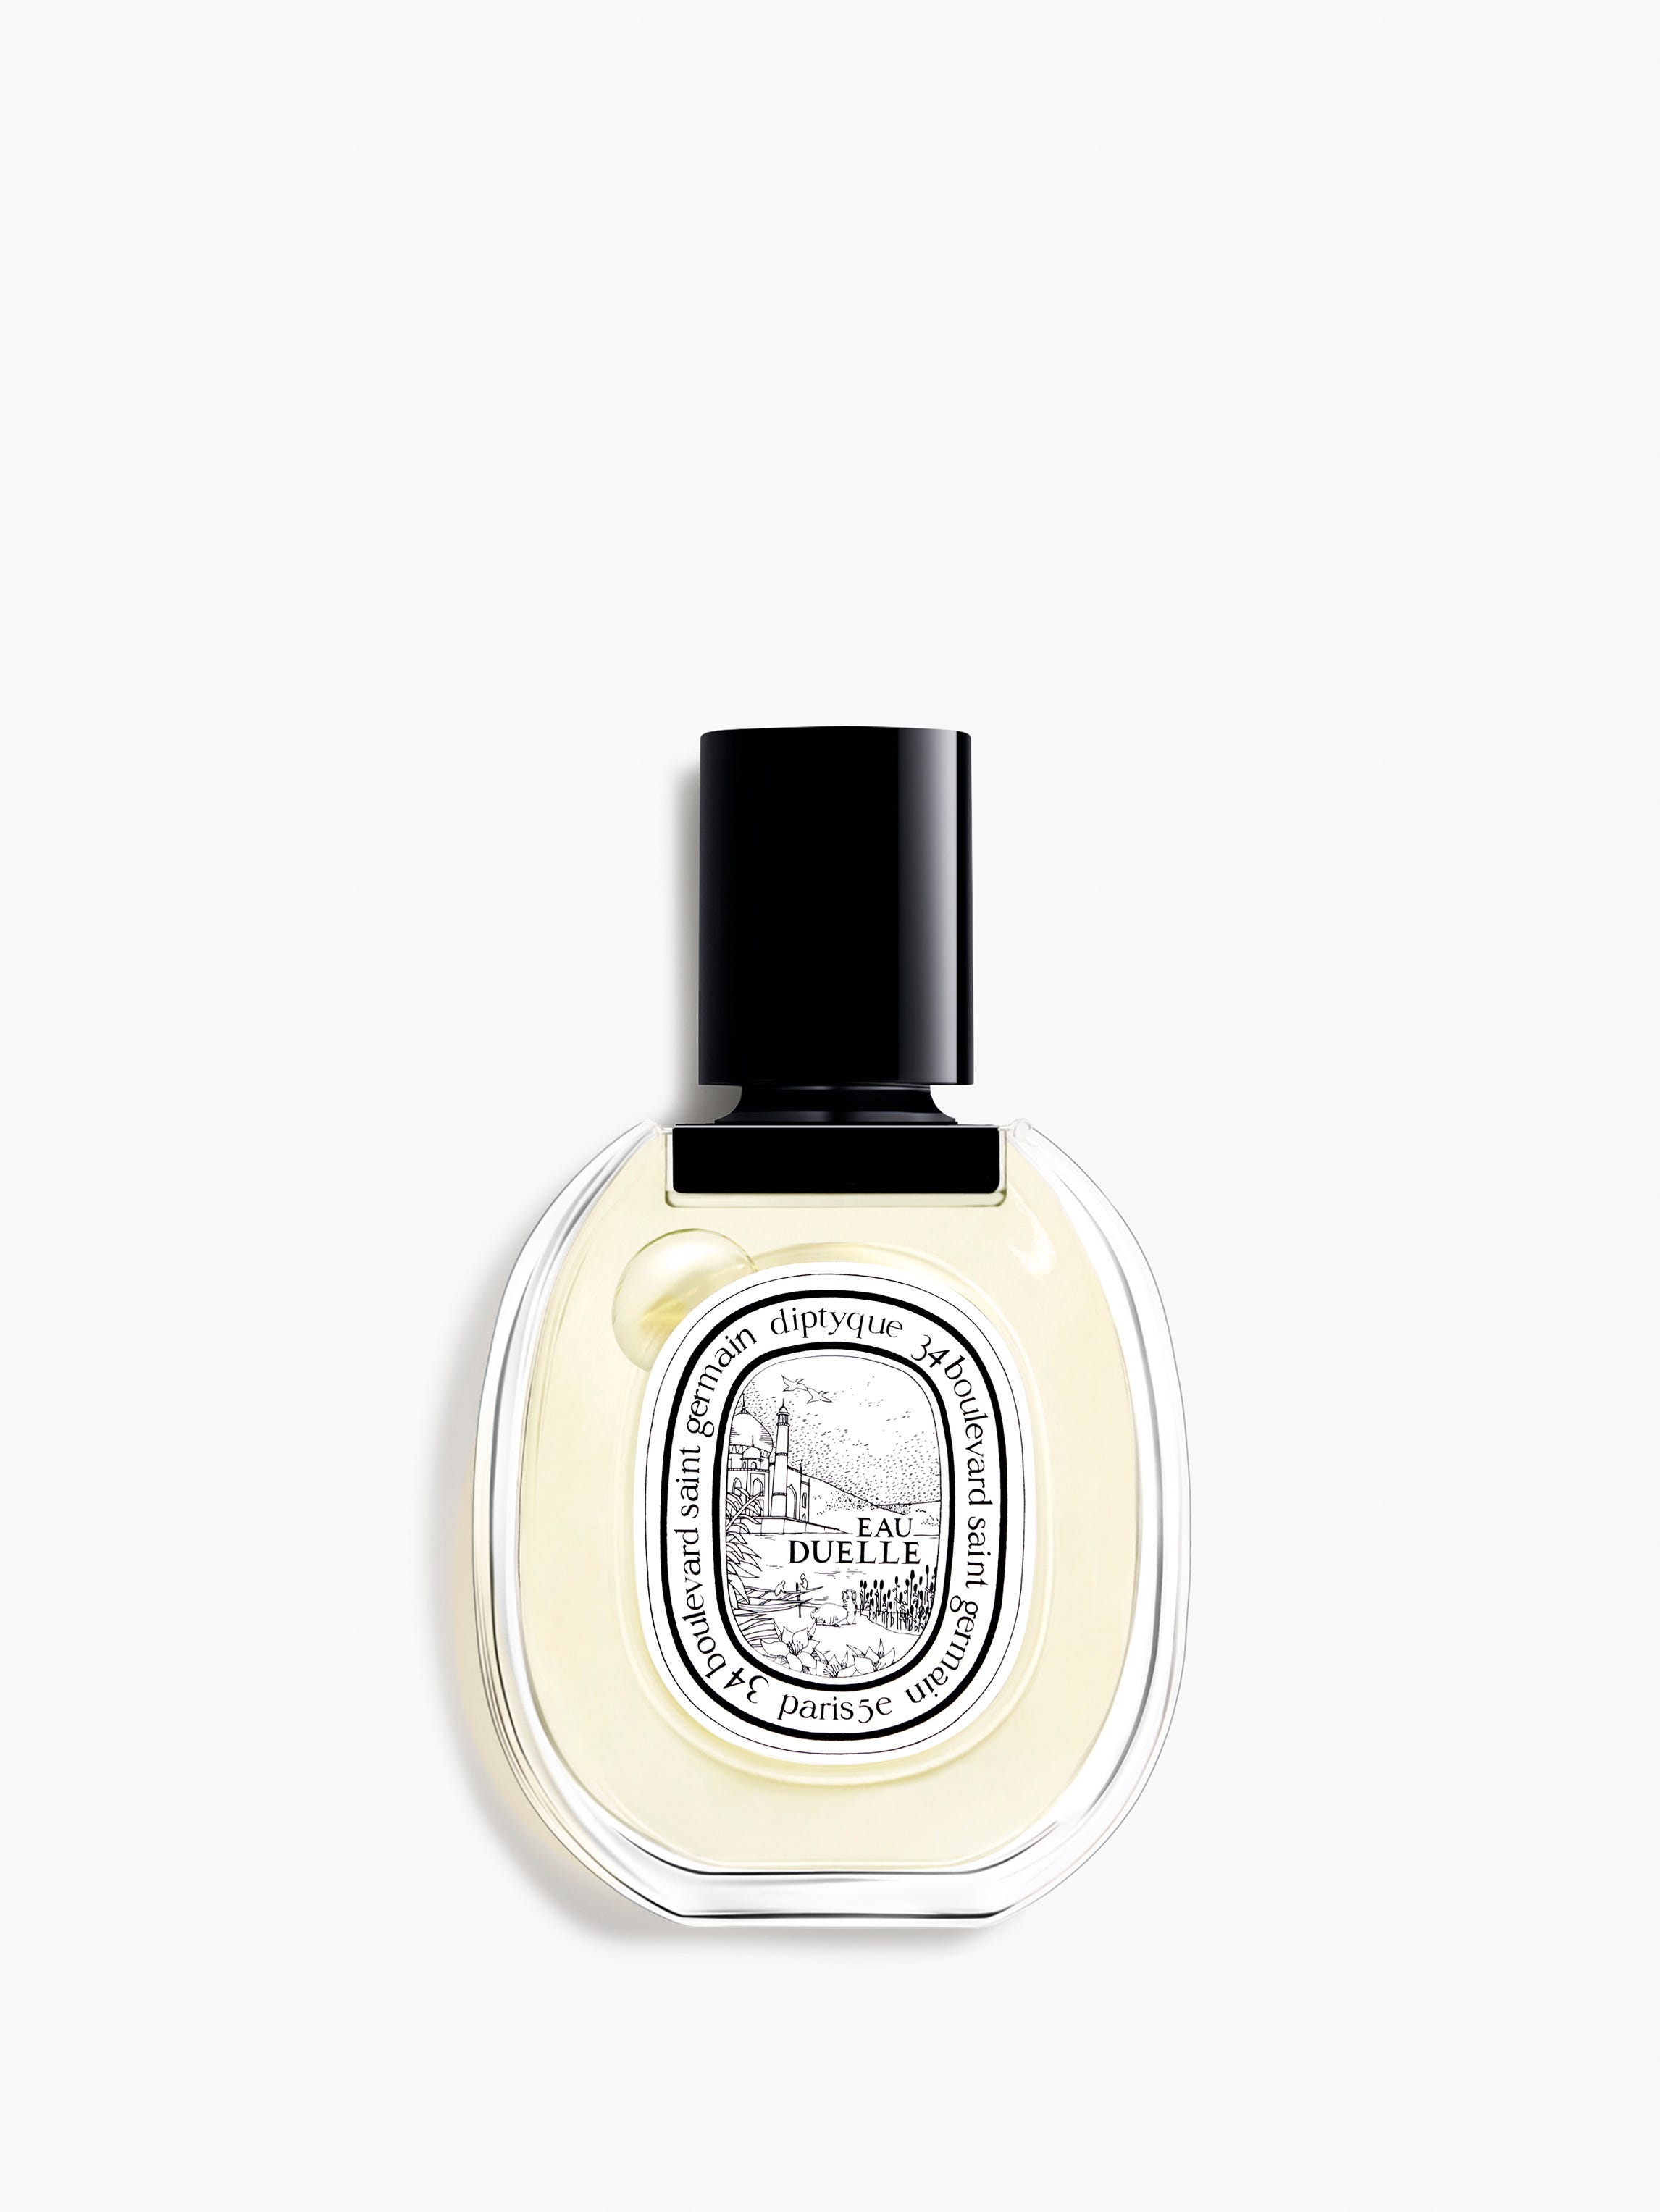 Discovery formats | Diptyque Paris